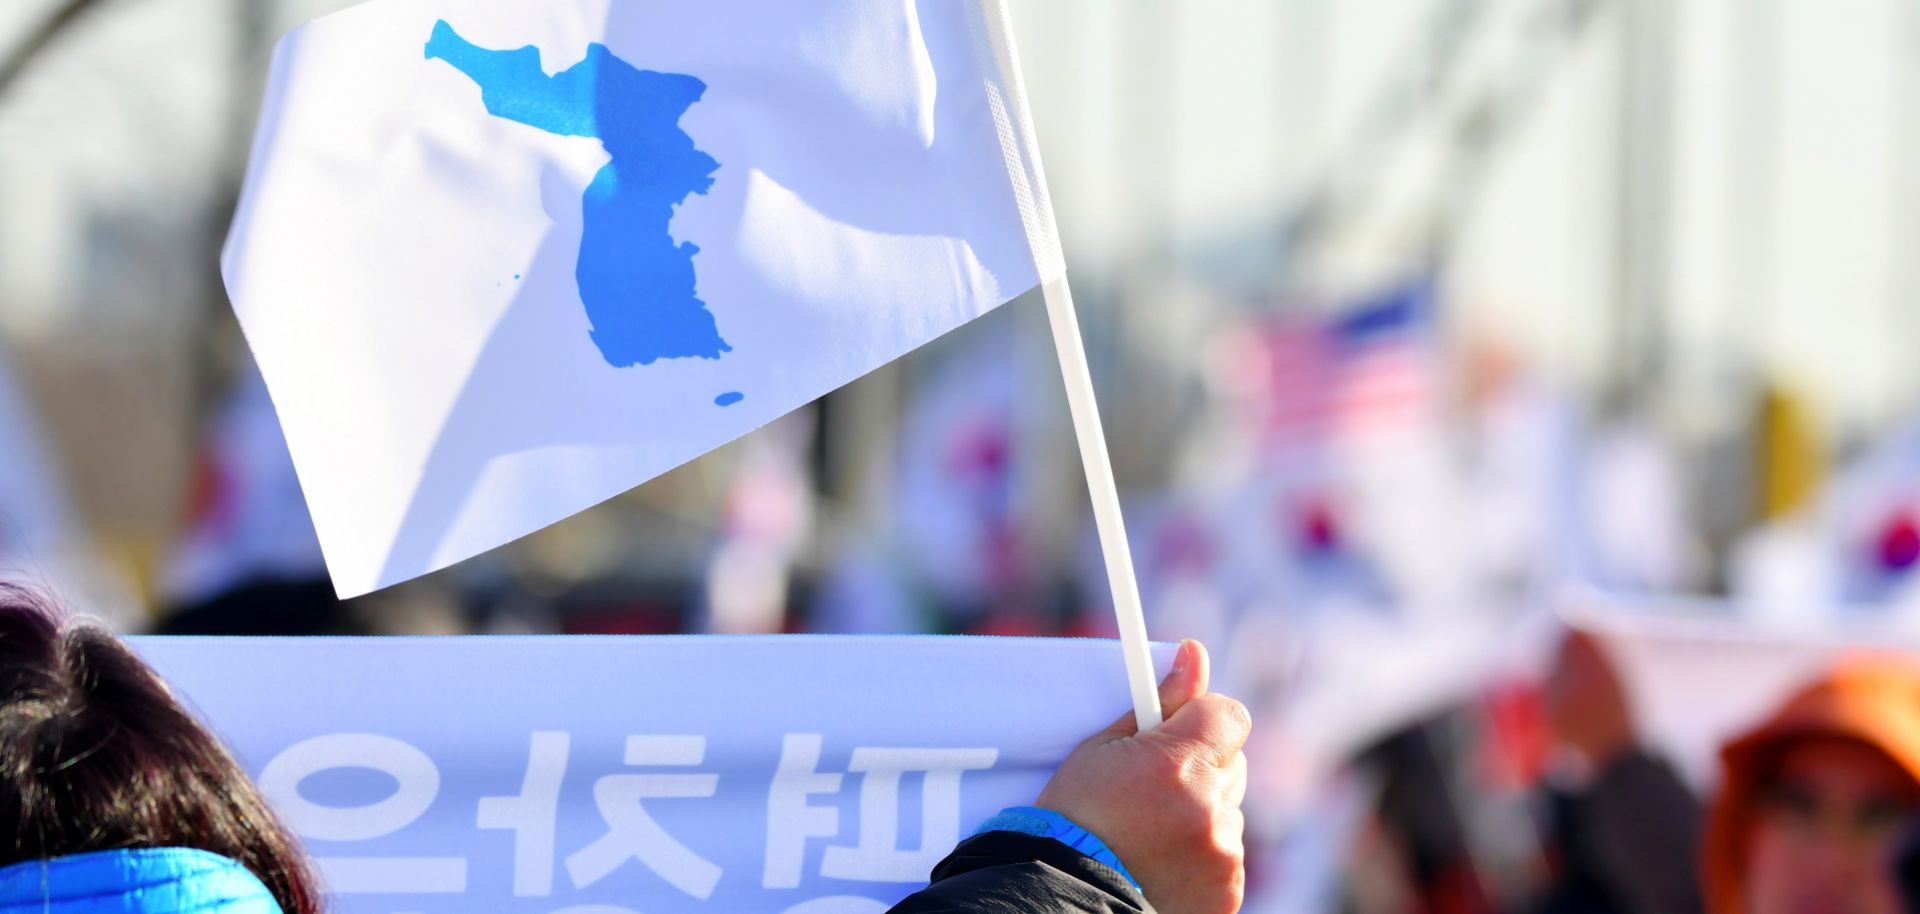 The unofficial 'Unification Flag' representing both North and South Korea became a symbol of the warming ties between the two countries during the Pyeongchang Olympics.